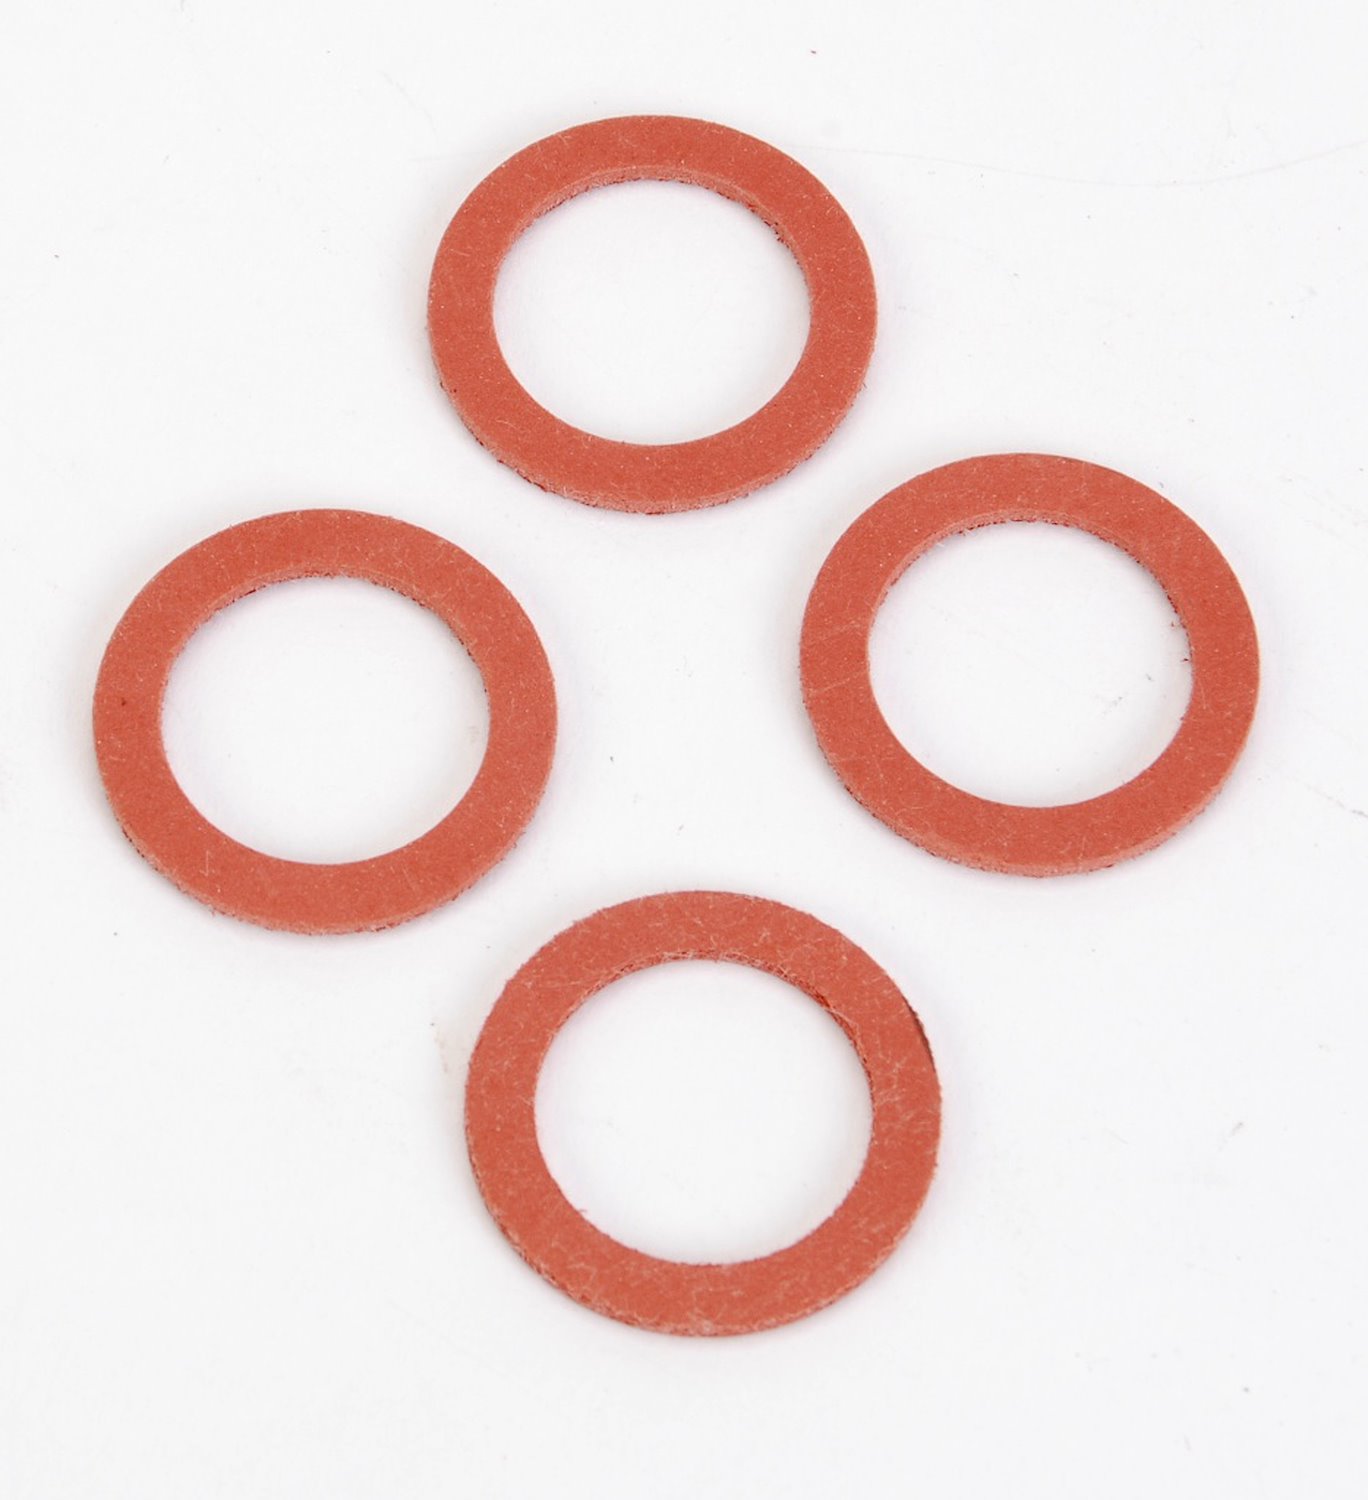 Power Valve Gaskets Made in the USA